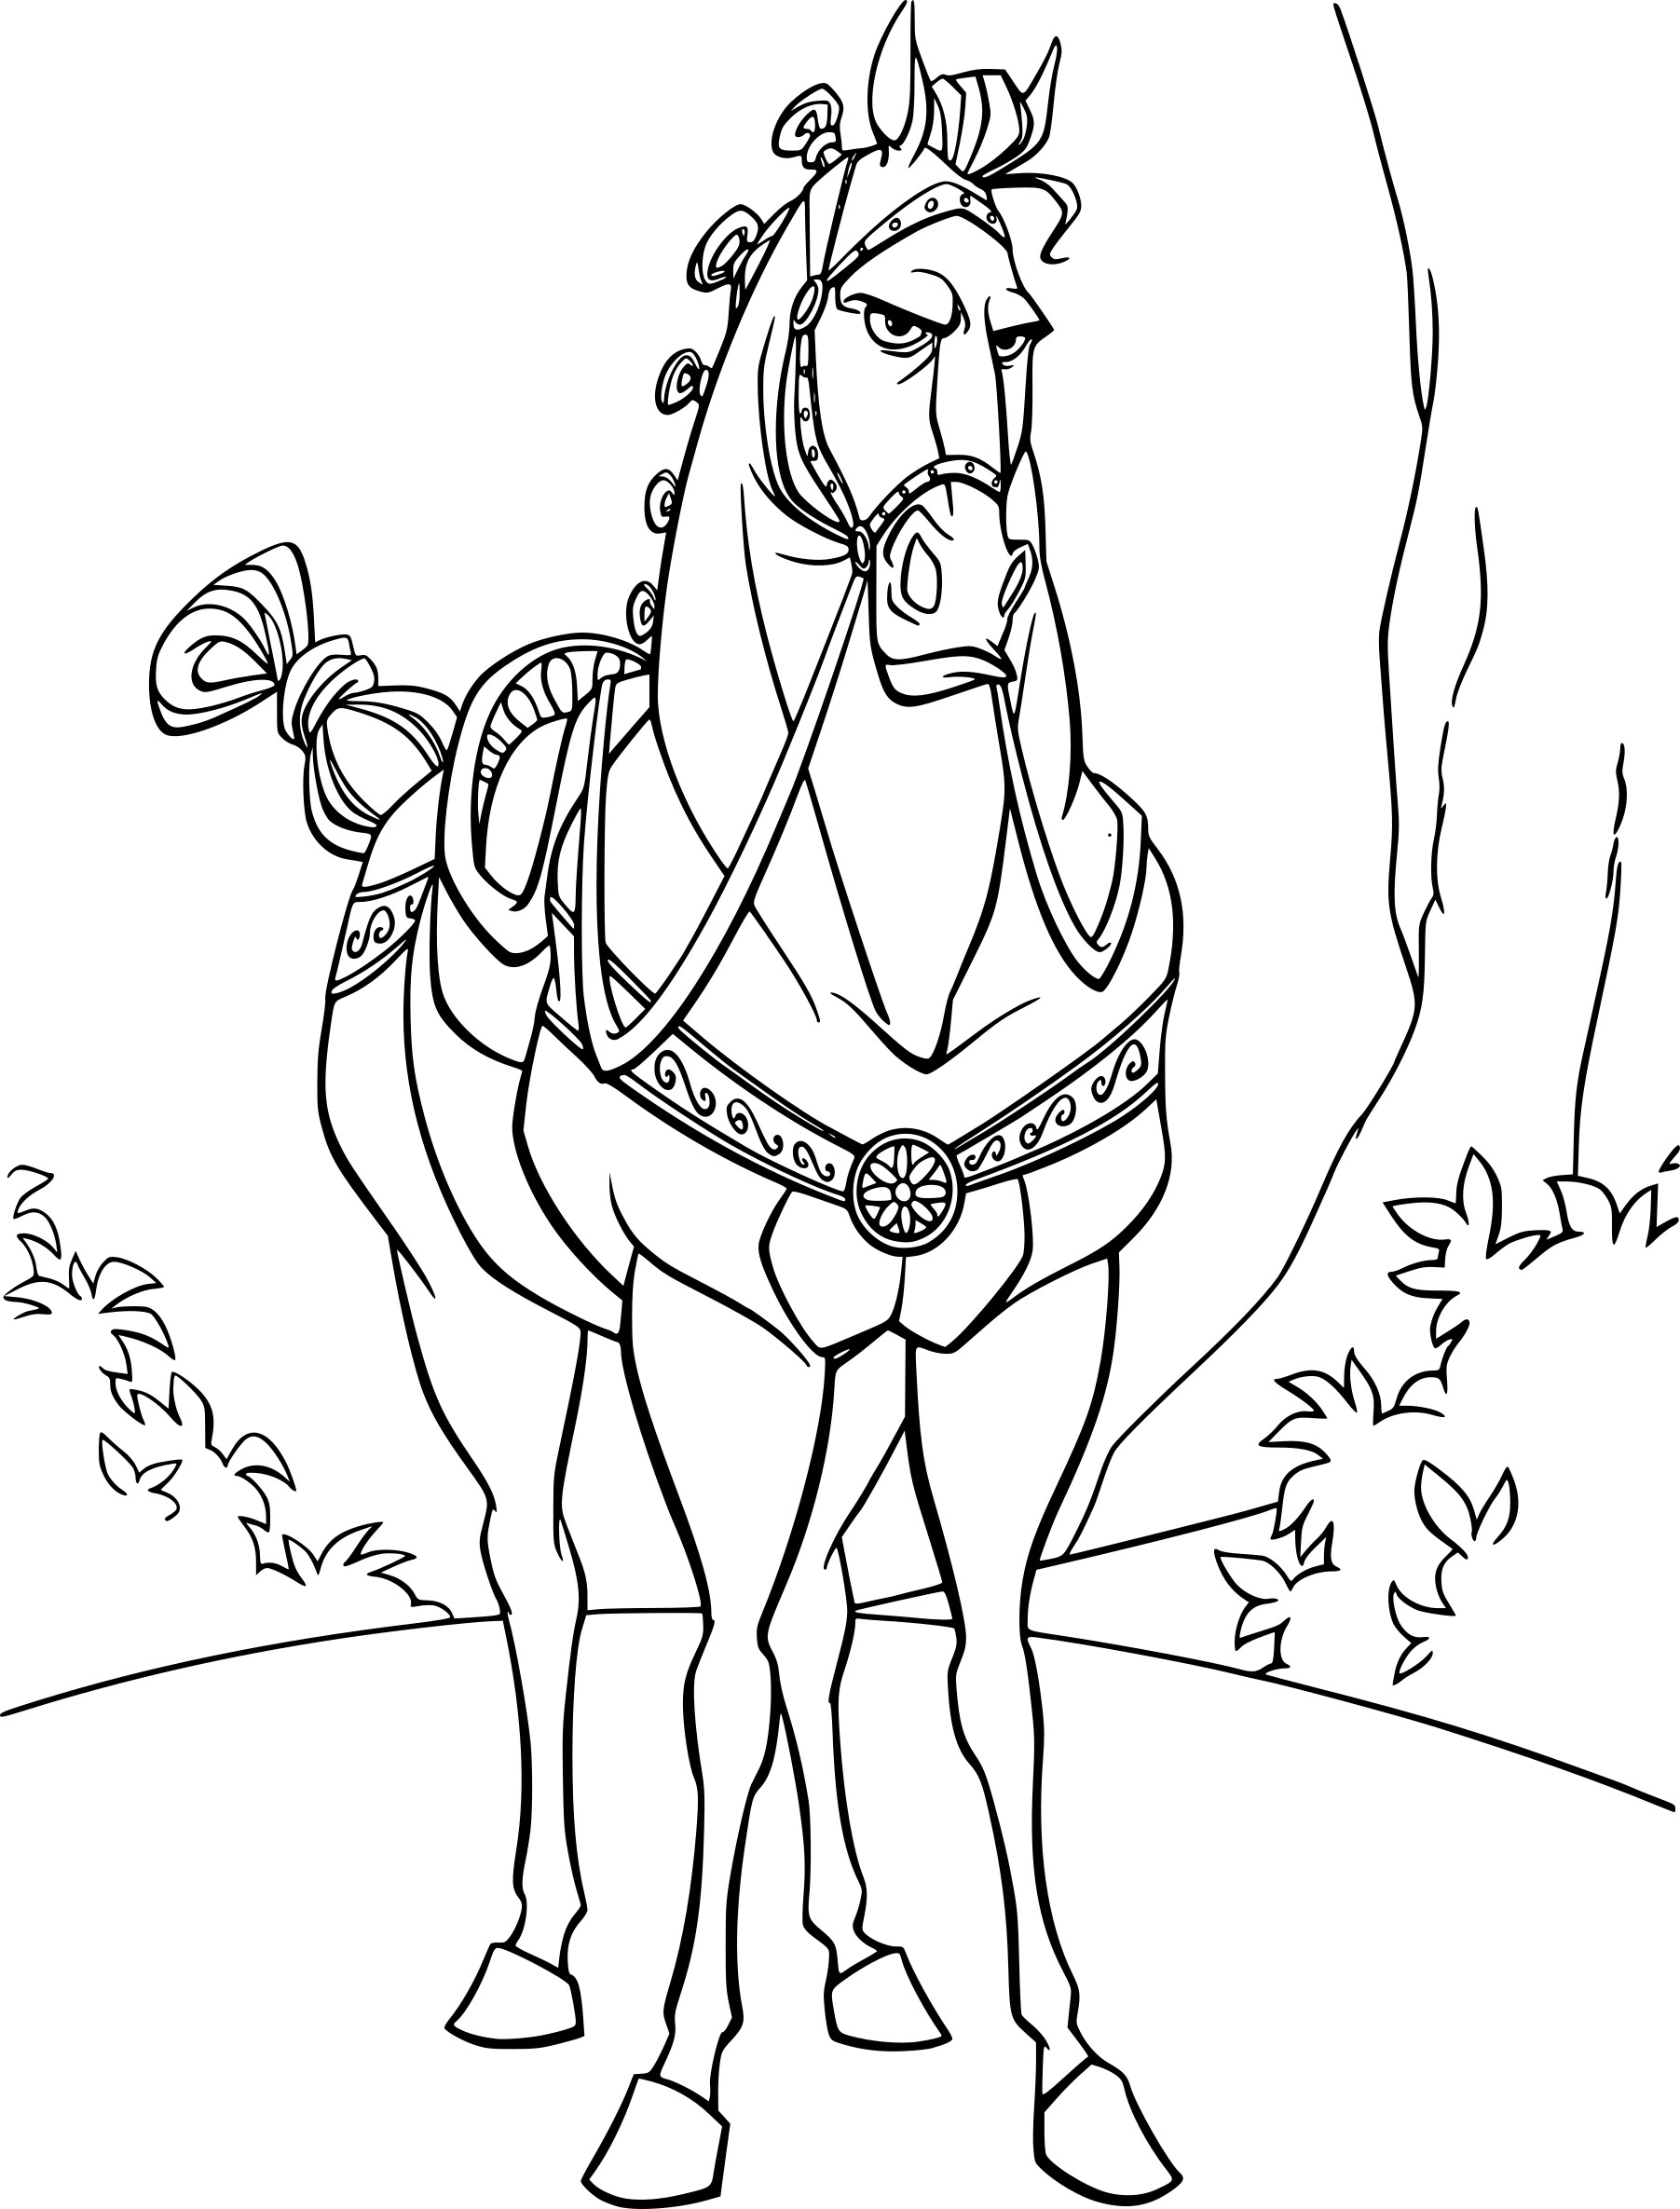 Maximus coloring page